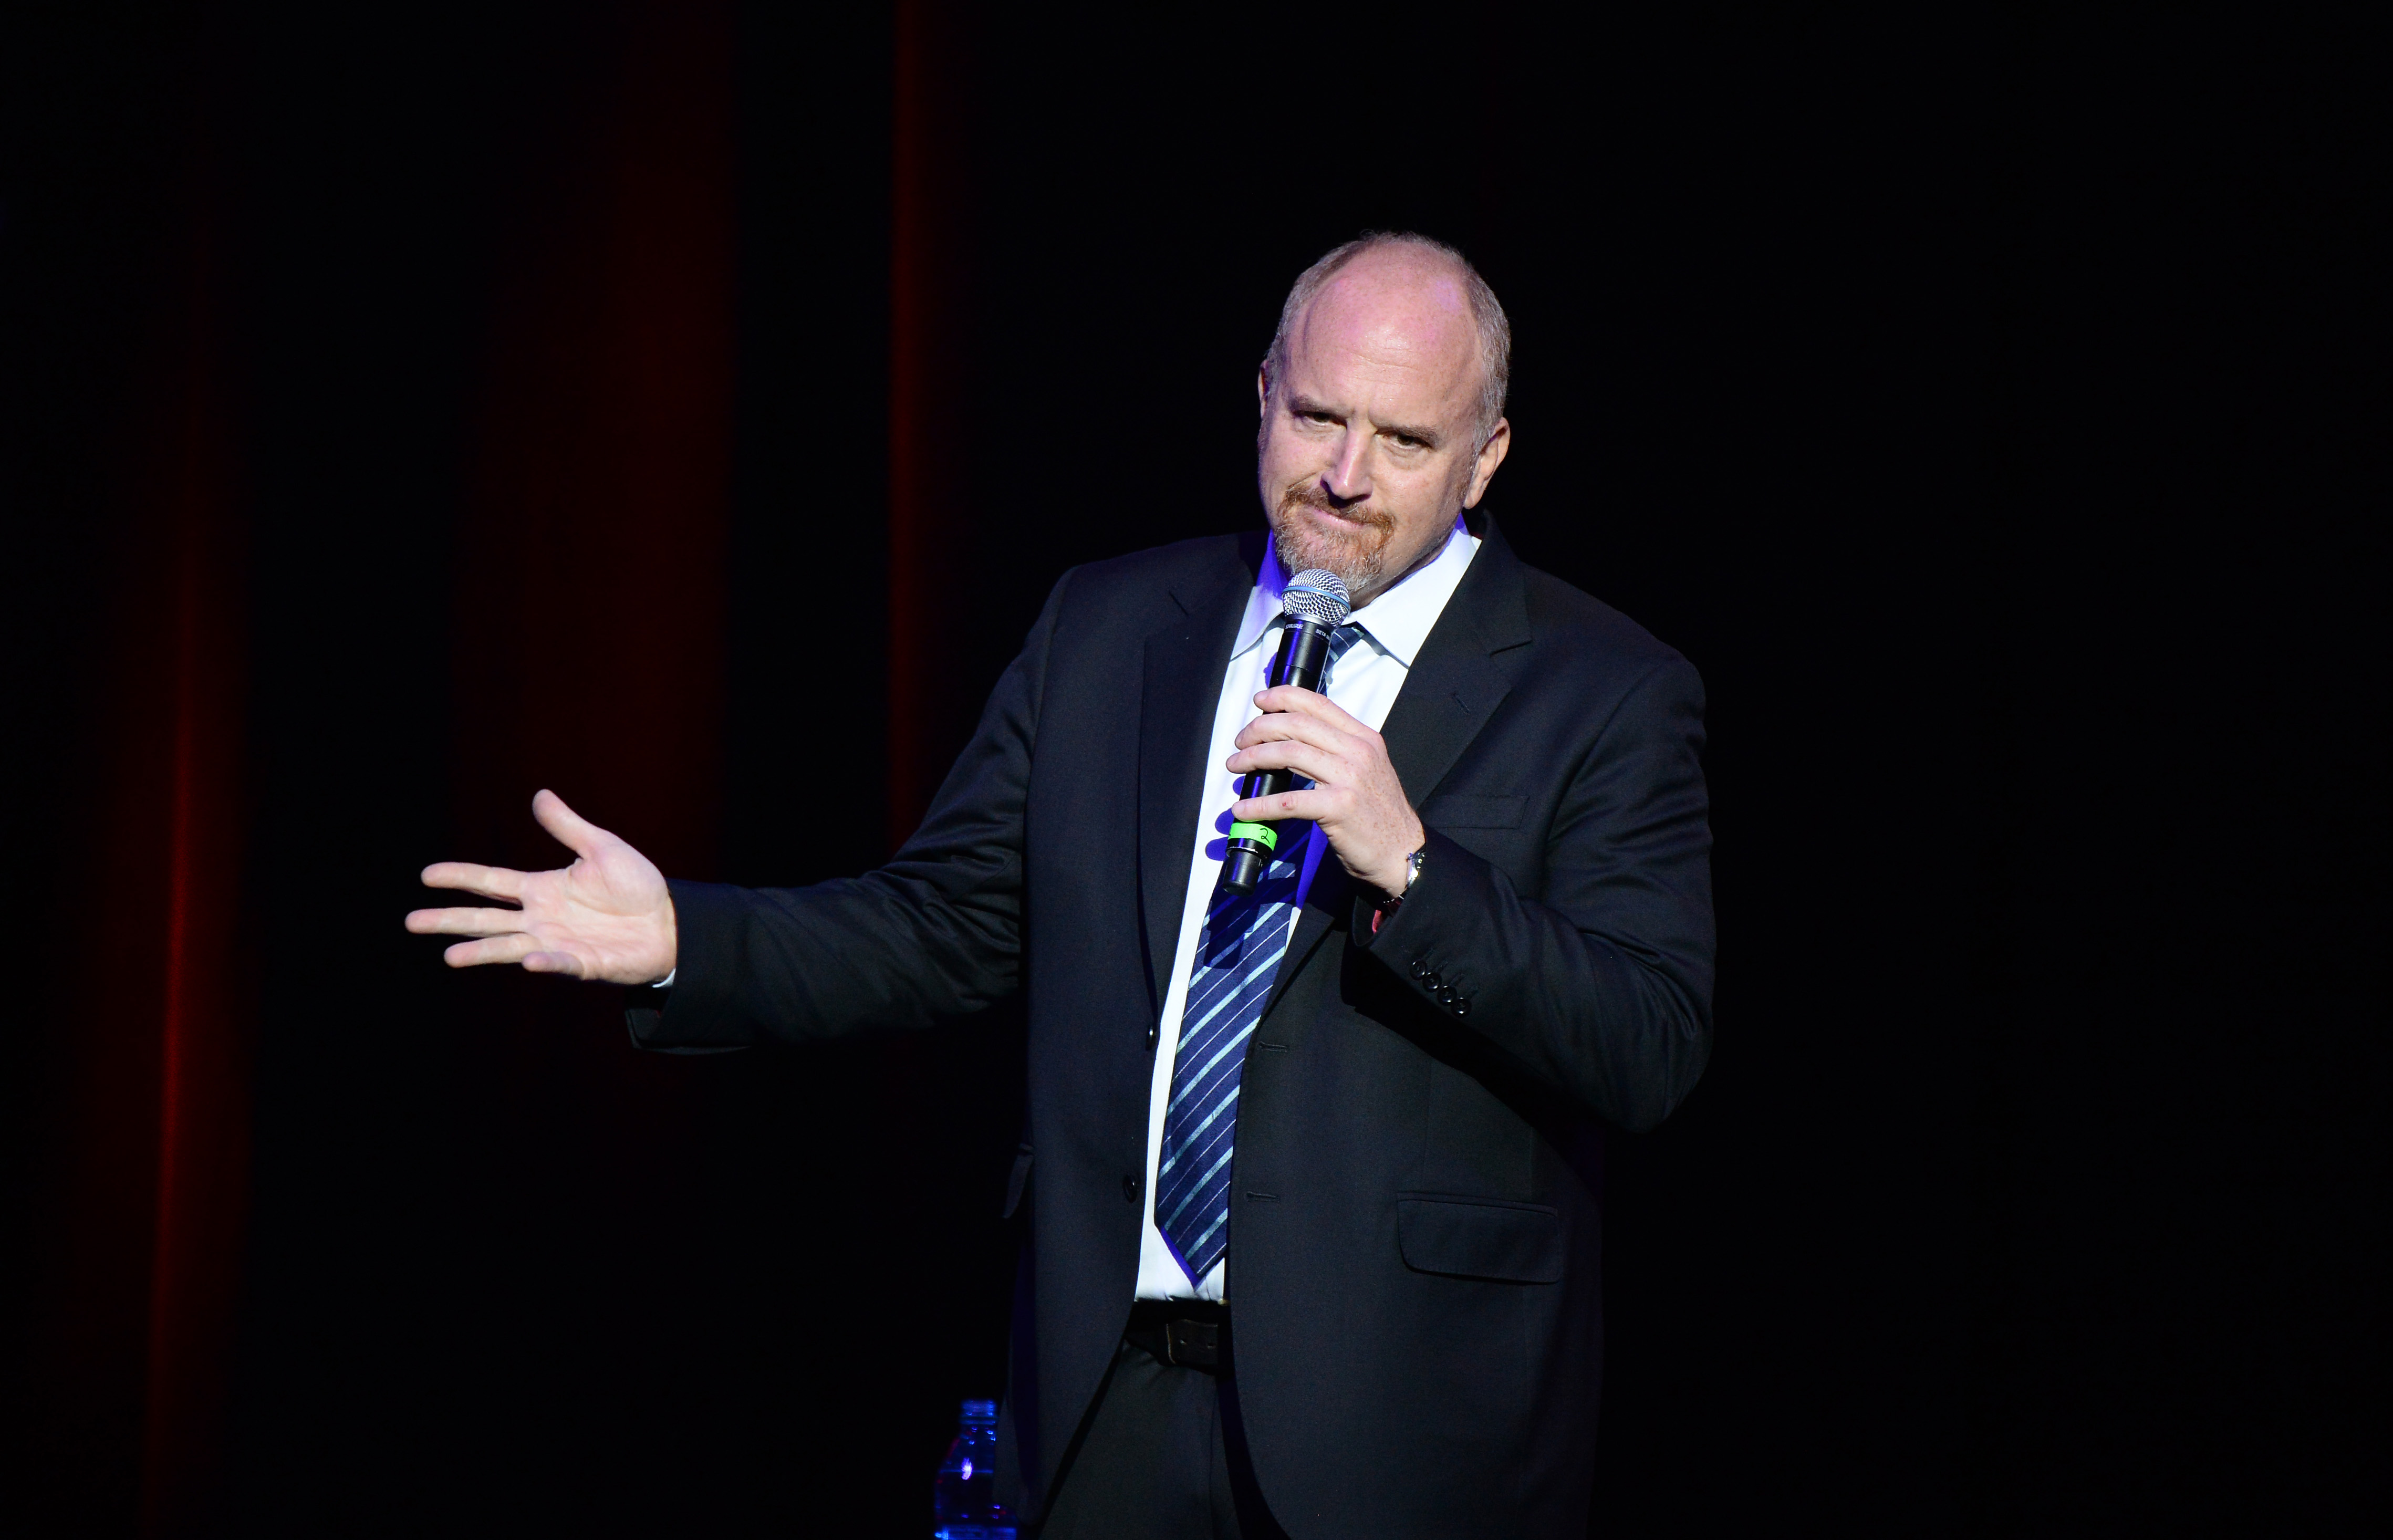 Louis C.K. Claims His Sexual Misconduct Cost Him $35 Million "in an Hour"